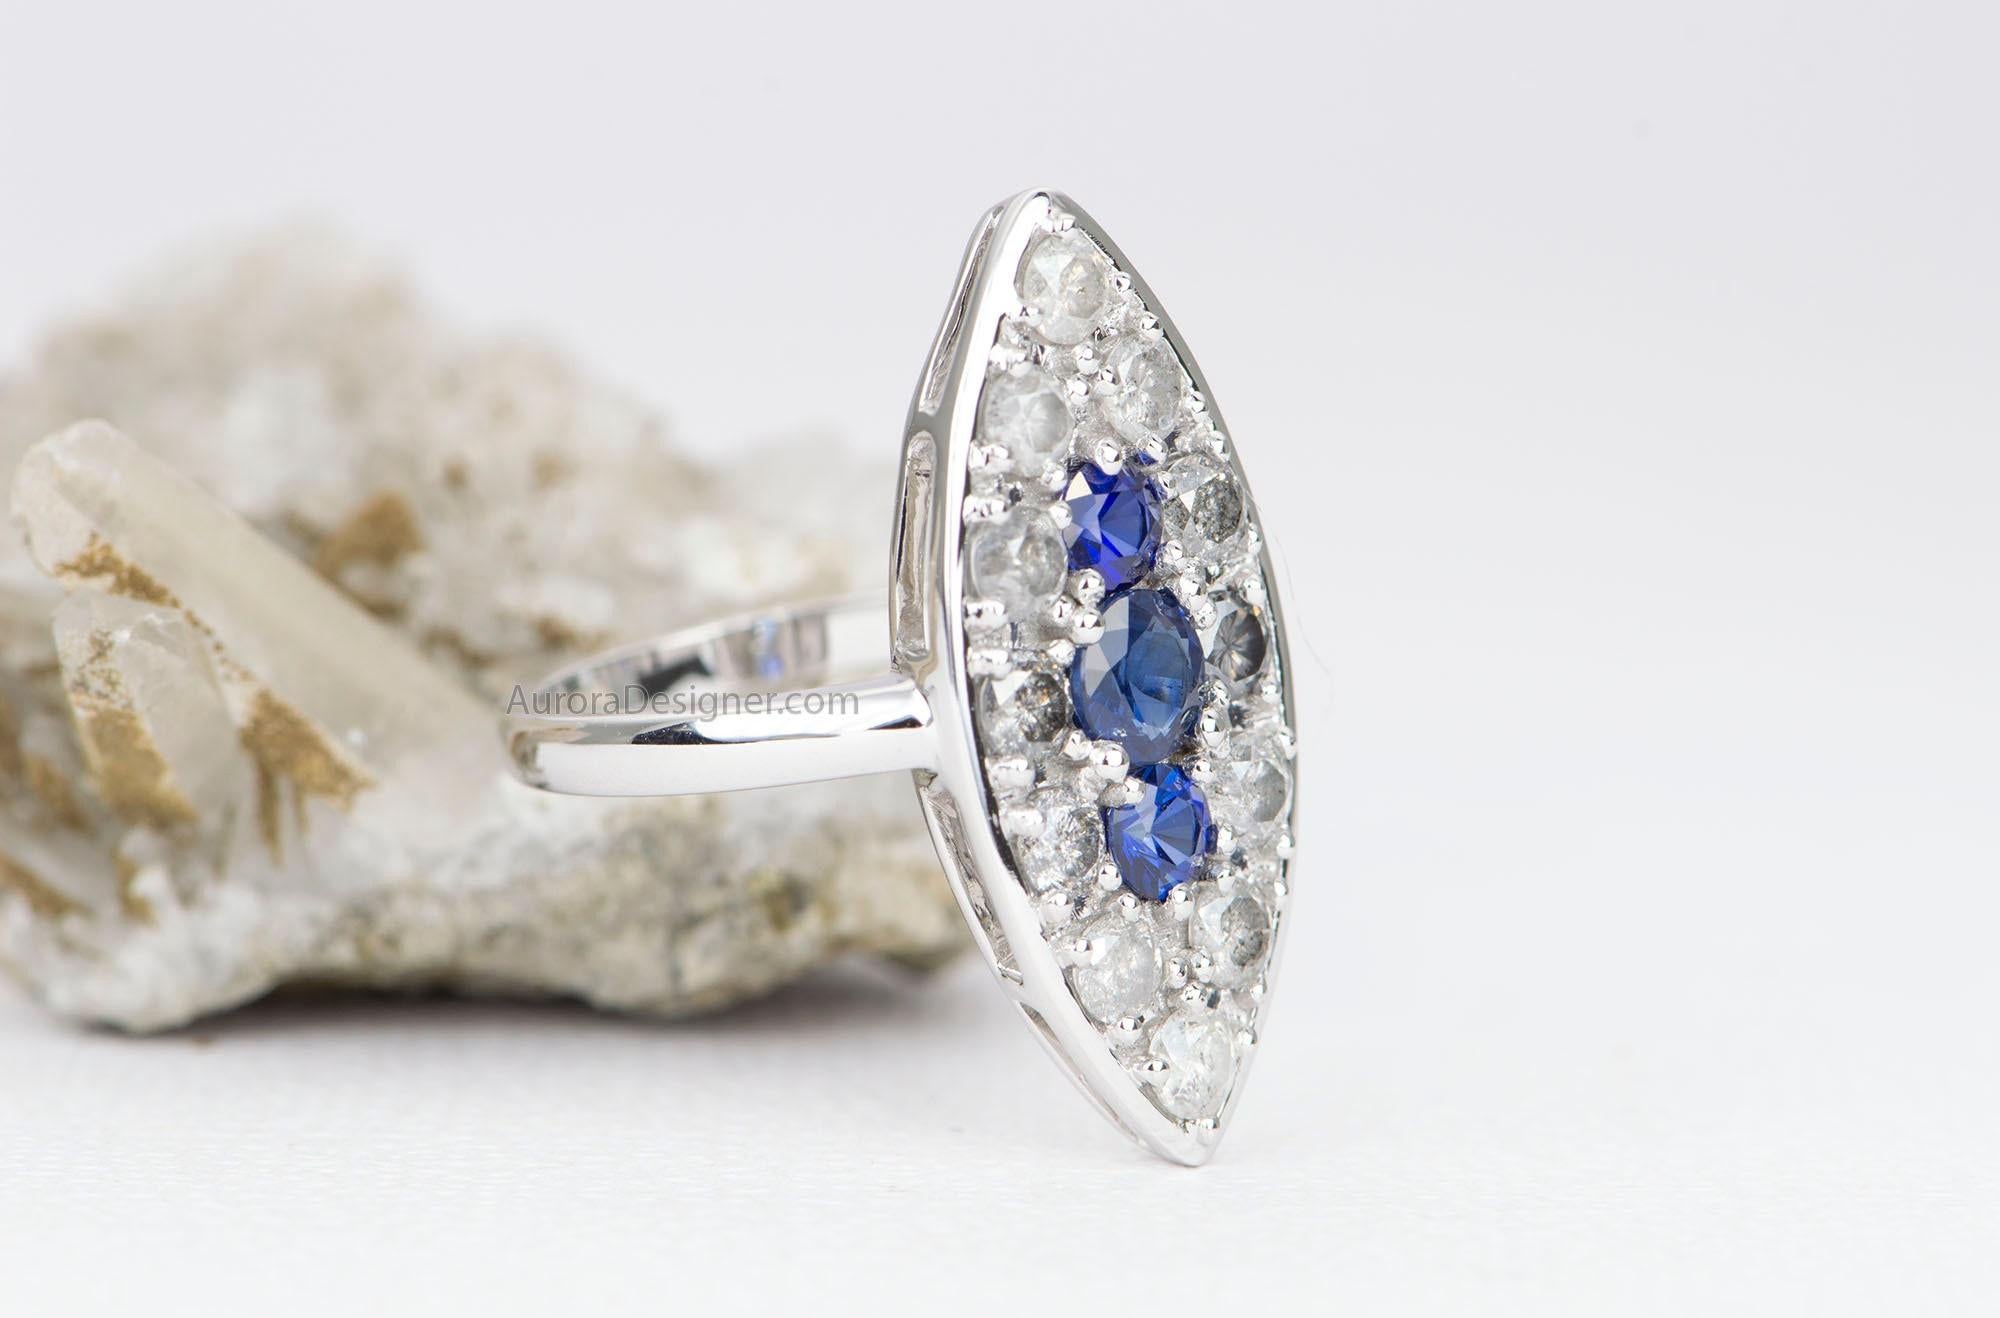 ♥  This is a vintage-inspired ring created in the Victorian era navette ring style
♥  Three royal blue sapphires are set in the center, then surrounded by a ring of ombrÃ© colored diamonds ranging from milky white to dark gray 
♥  True to the